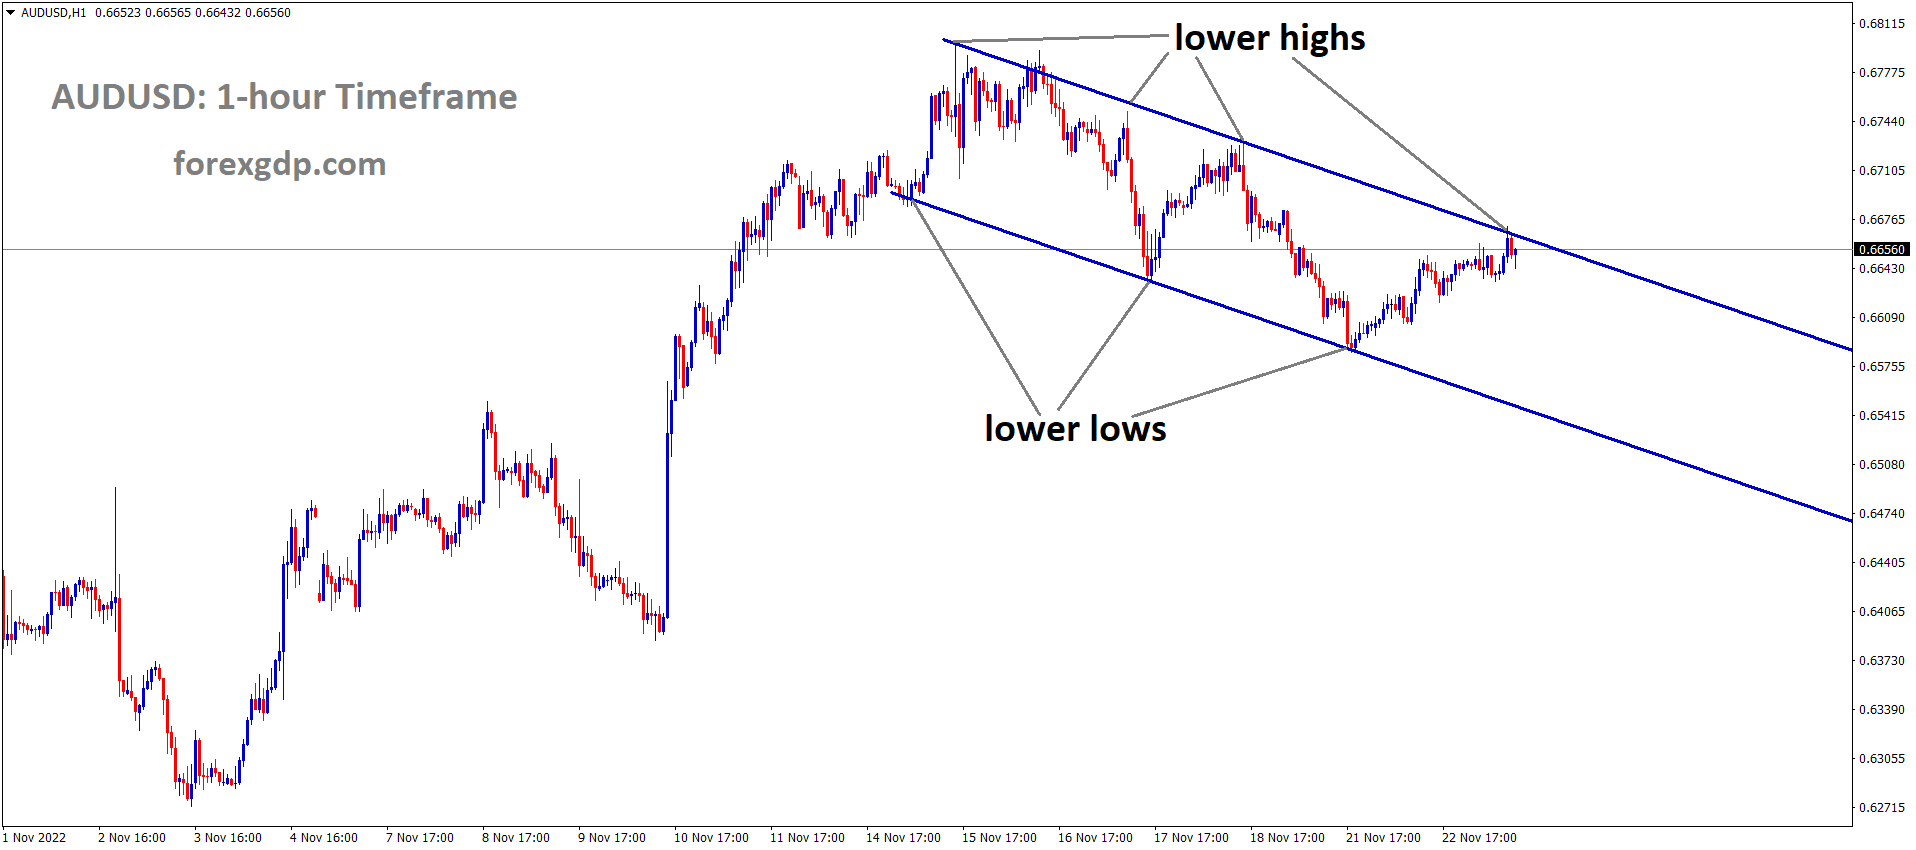 AUDUSD is moving in the Descending channel and the market has reached the lower high area of the channel 4